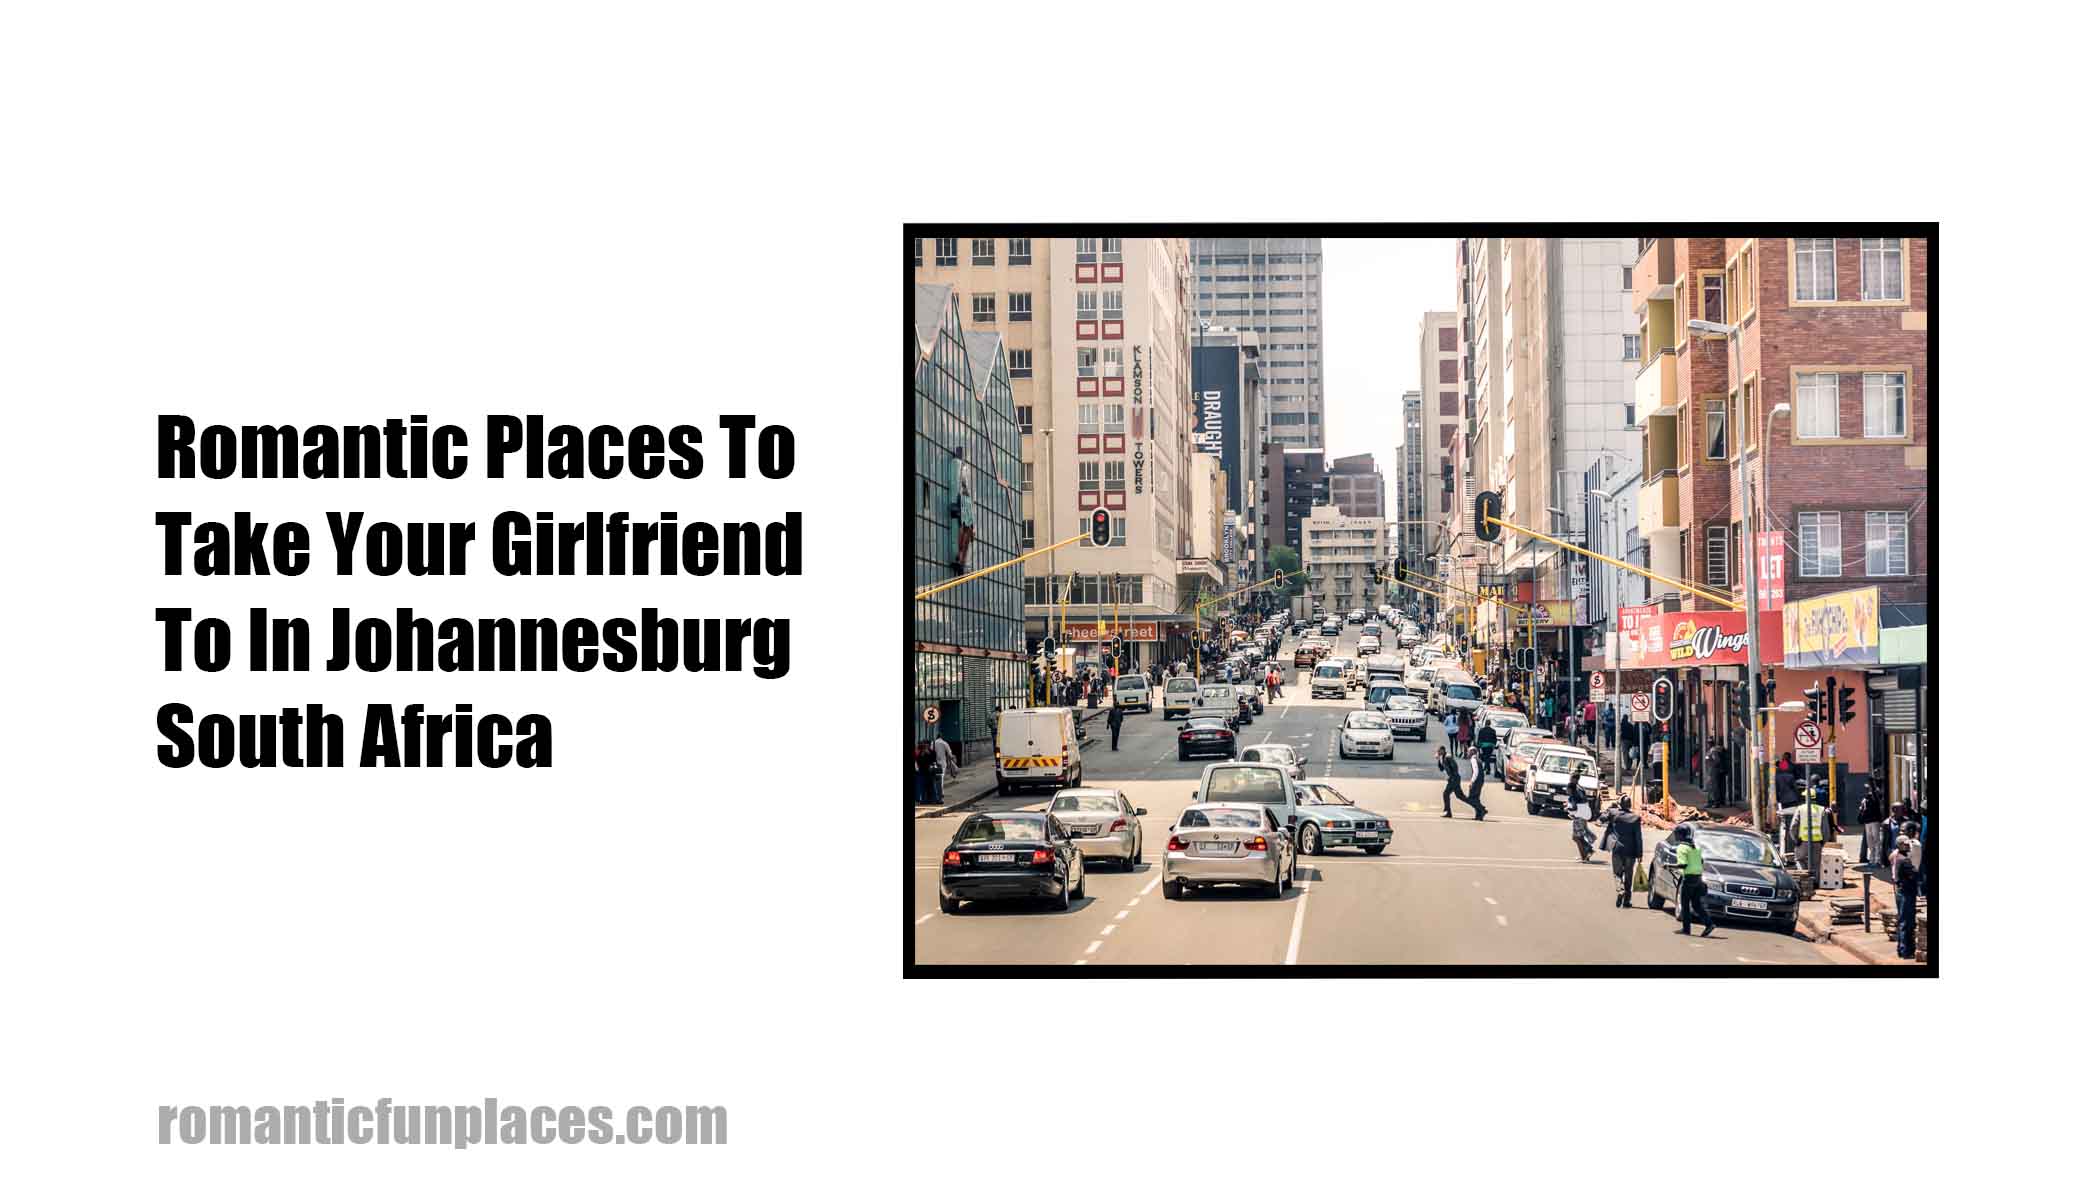 Romantic Places To Take Your Girlfriend To In Johannesburg South Africa 